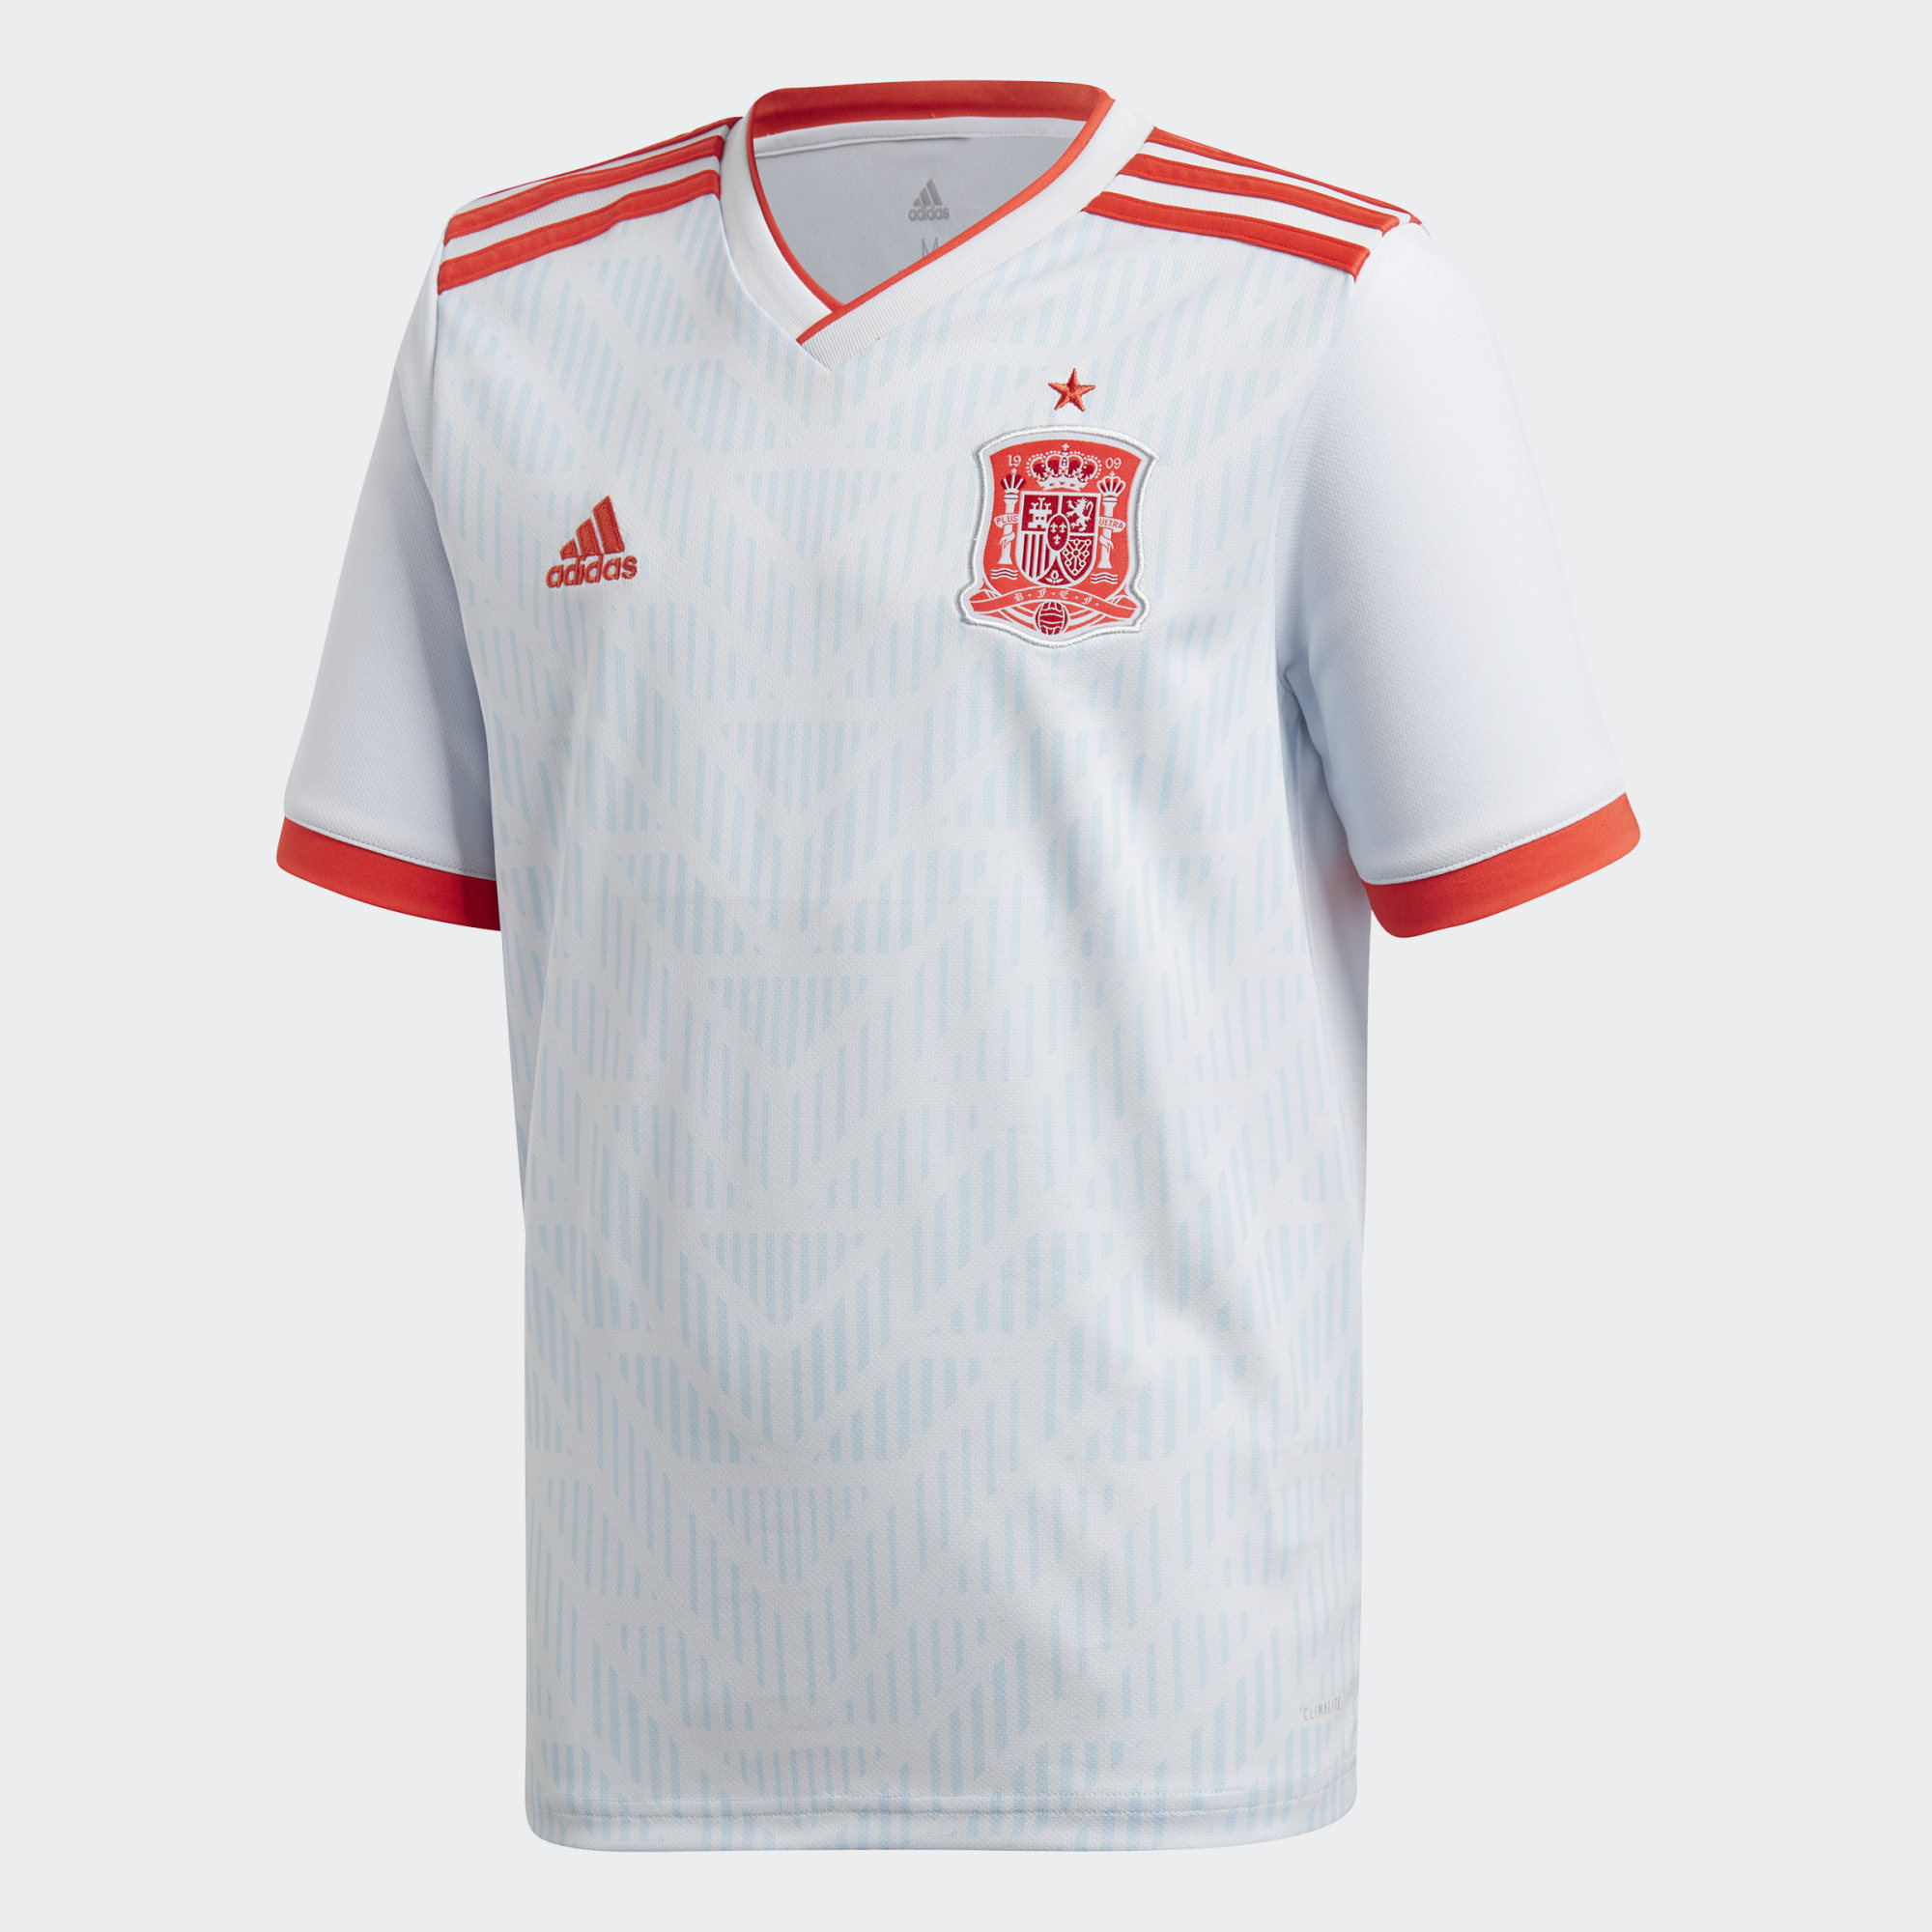 spain world cup jersey